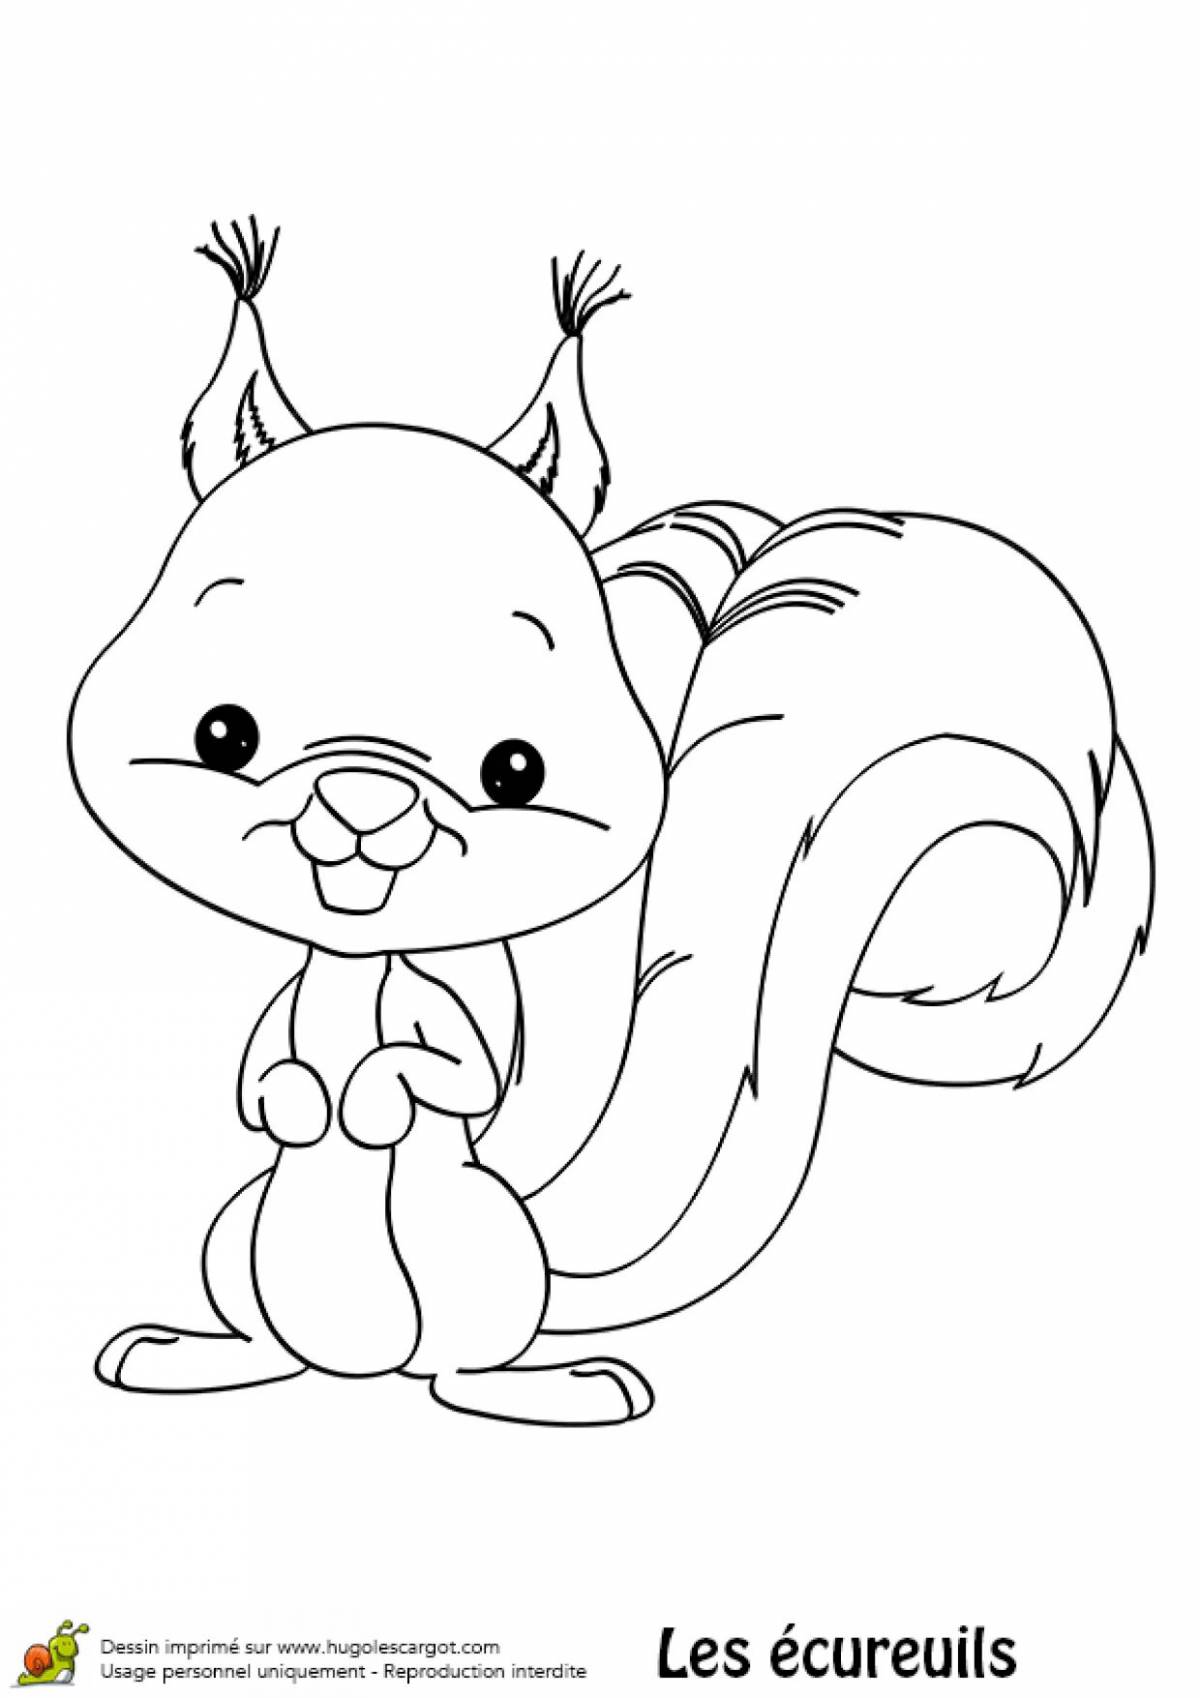 Amazing squirrel coloring book for kids